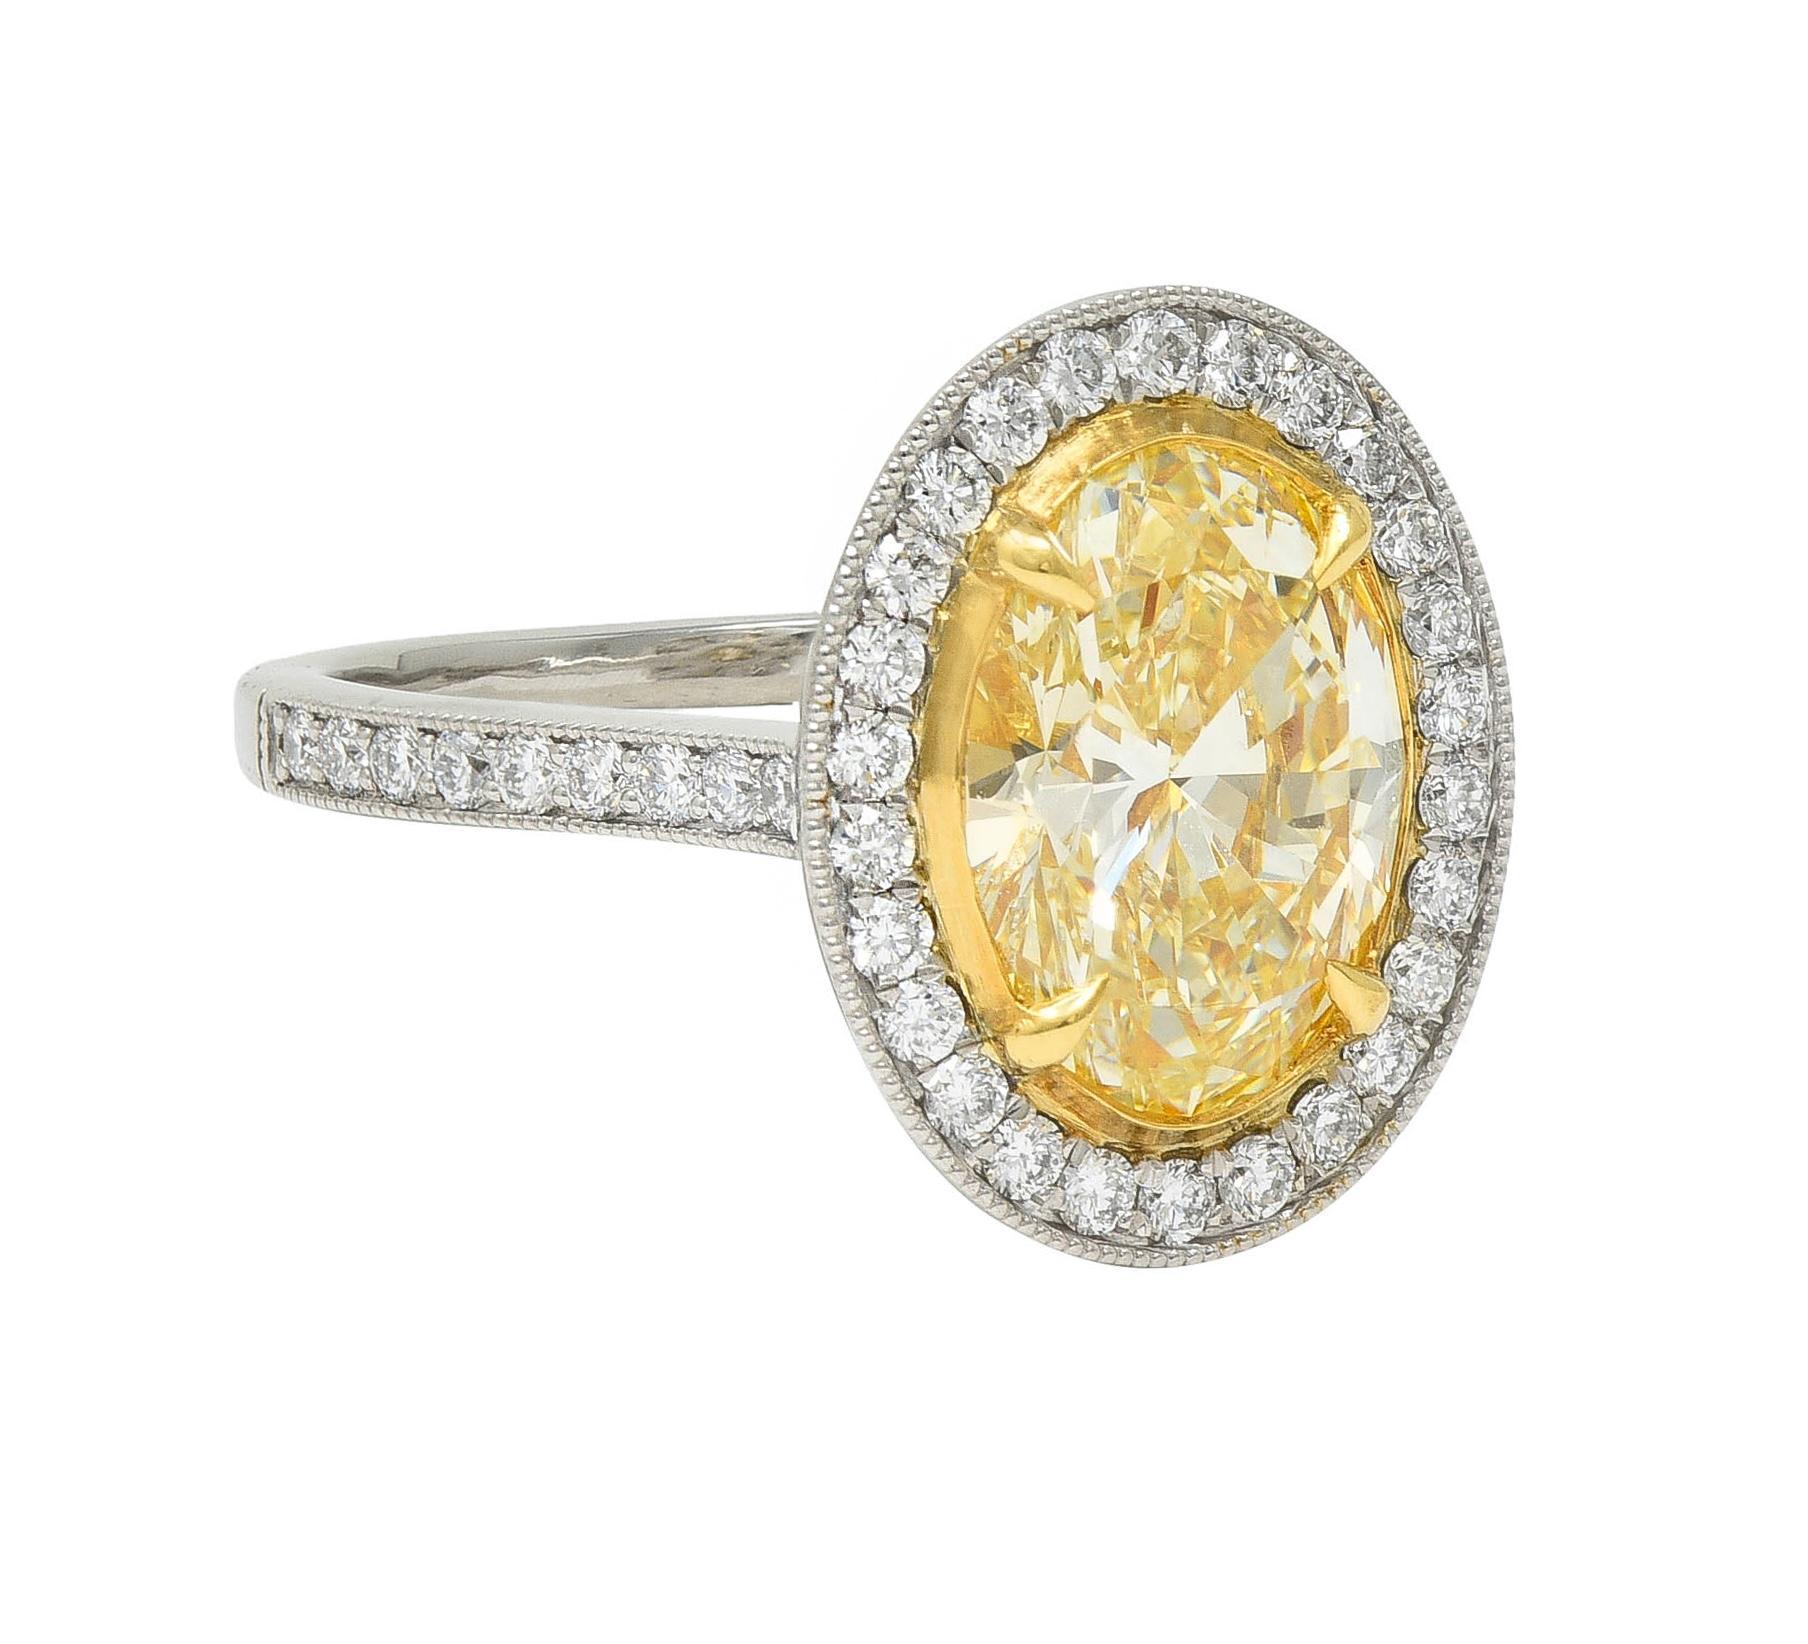 Centering an oval cut diamond weighing 2.16 carats - yellow (Y/Z) color with VS1 clarity
Prong set in gold with a platinum halo surround bead set with round brilliant cut diamonds
With additional diamonds bead set in cathedral shoulders and pierced